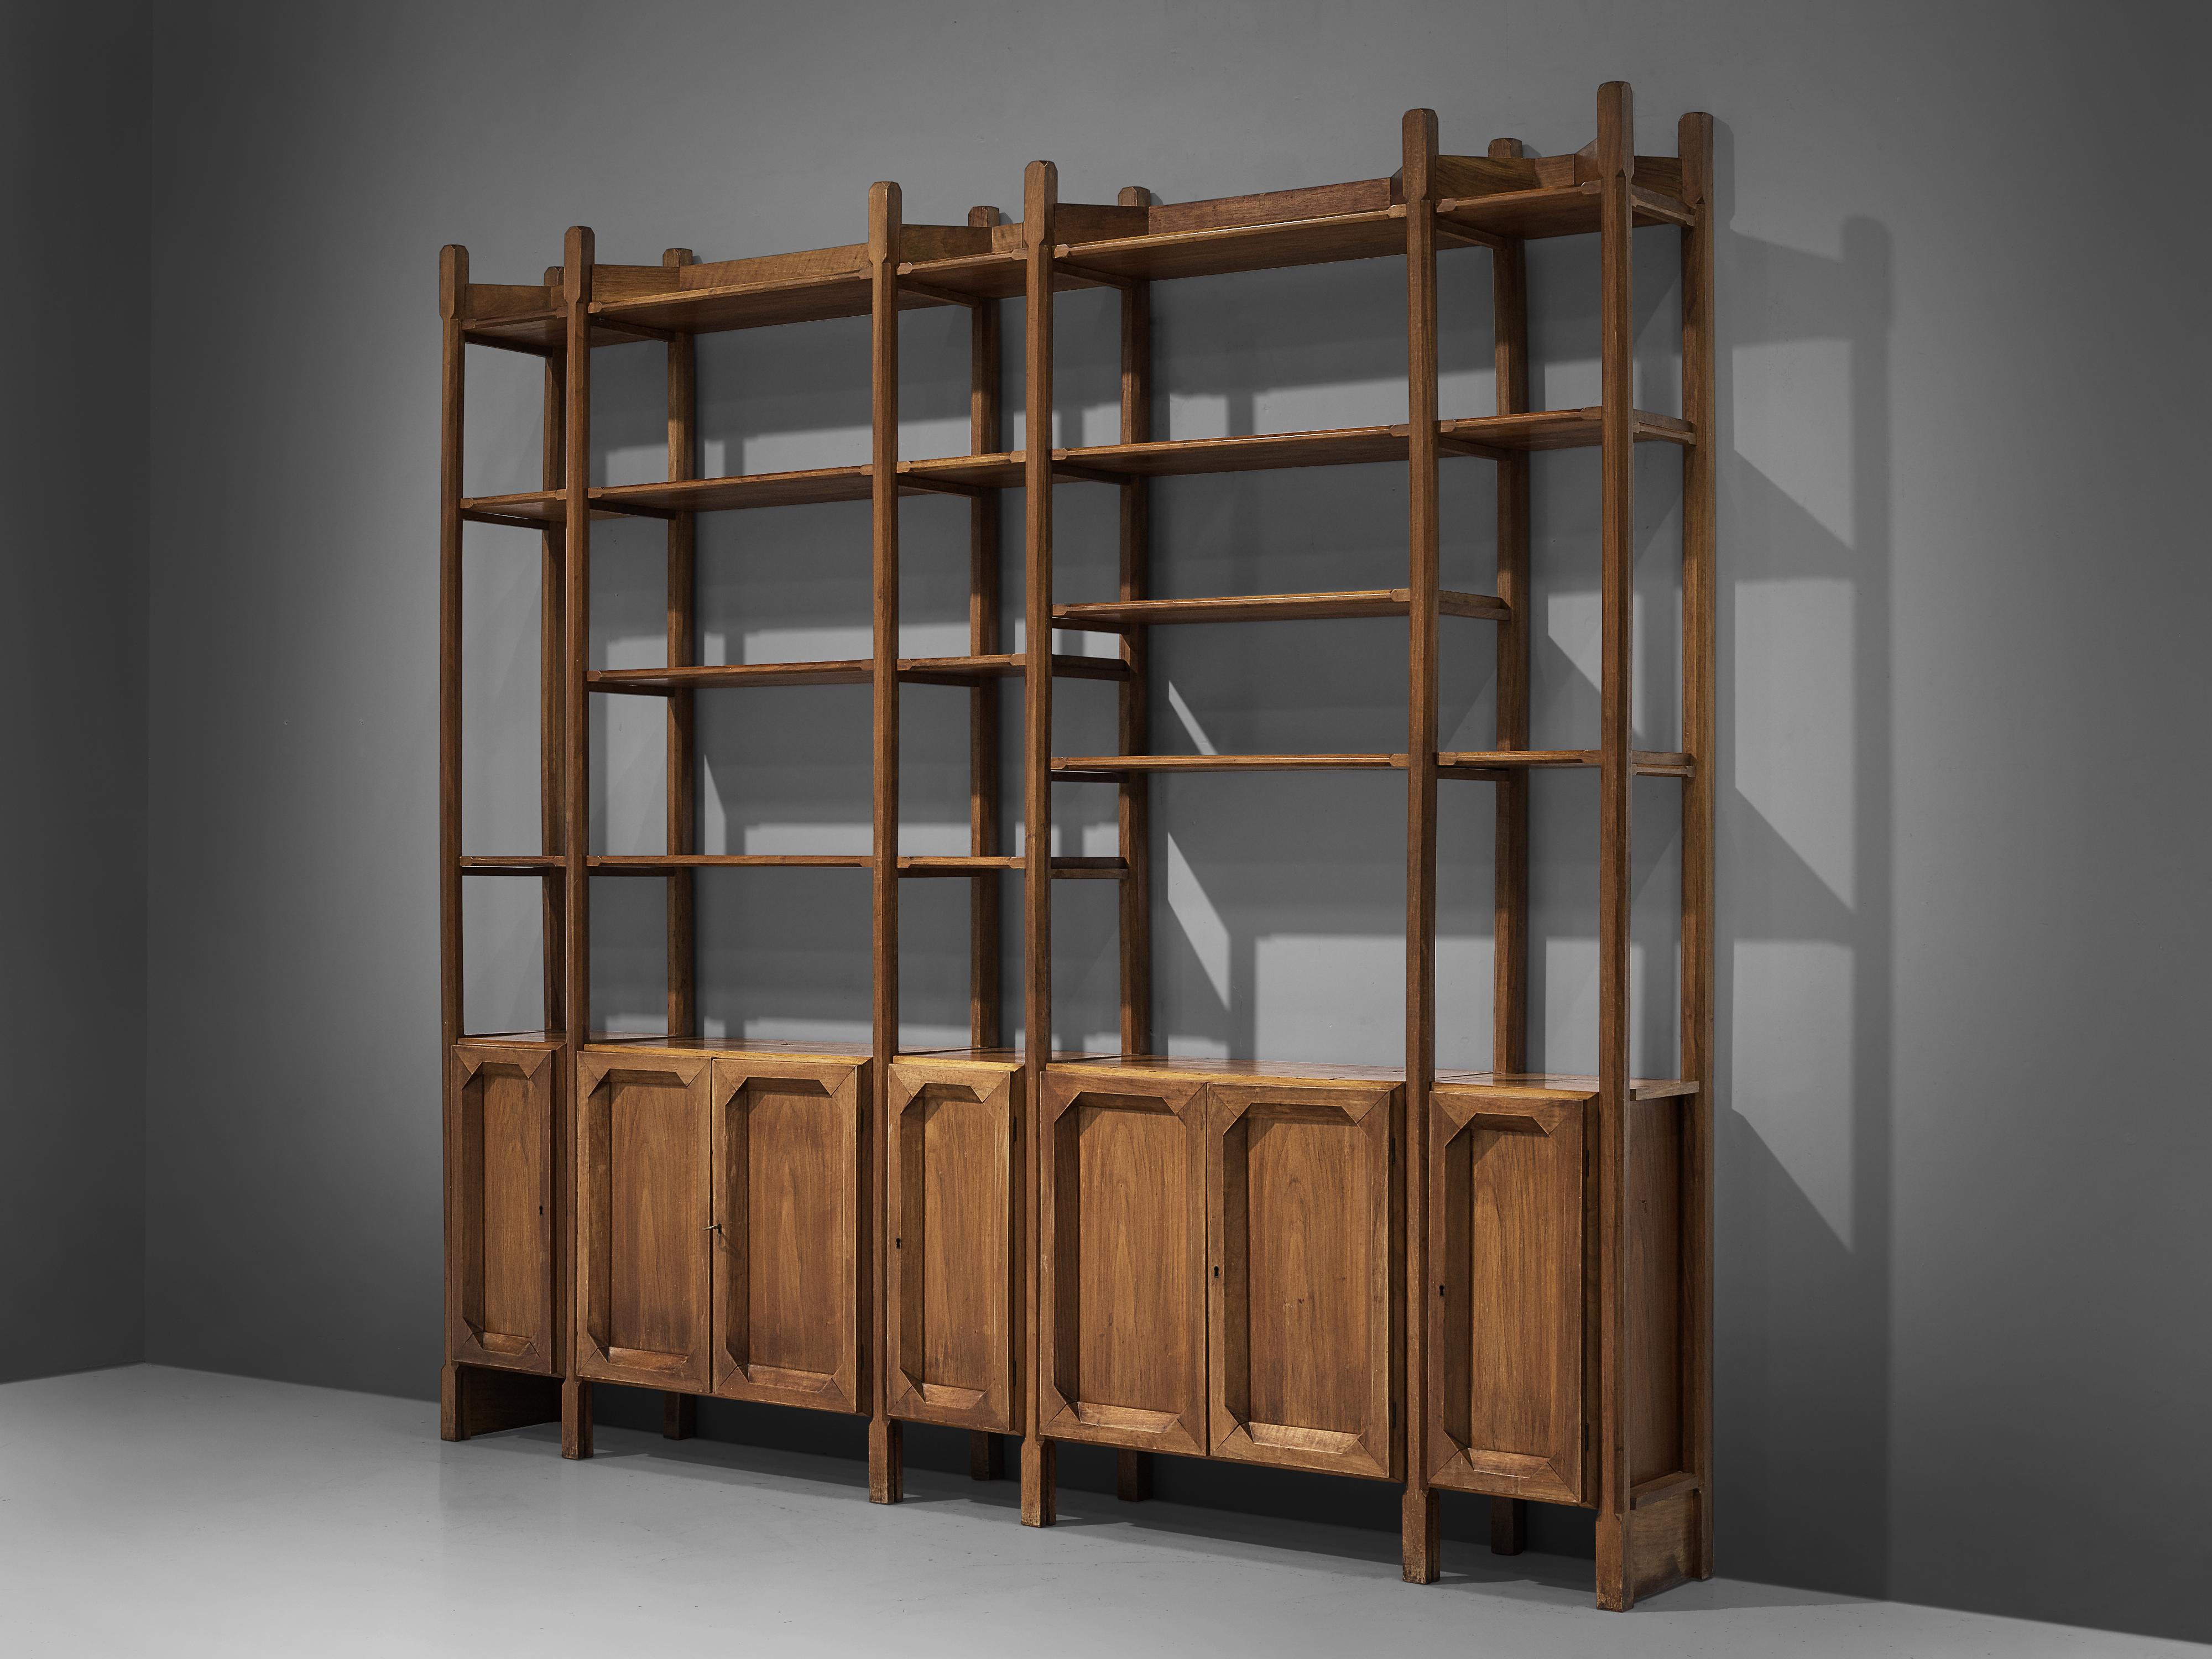 Bookcase, walnut, brass, Italy, 1960s

Wonderful Italian open bookcase with five cabinets. All elements feature carved details that contribute to the sculptural and grand expression of the shelf. Five columns in two widths all start with a cabinet